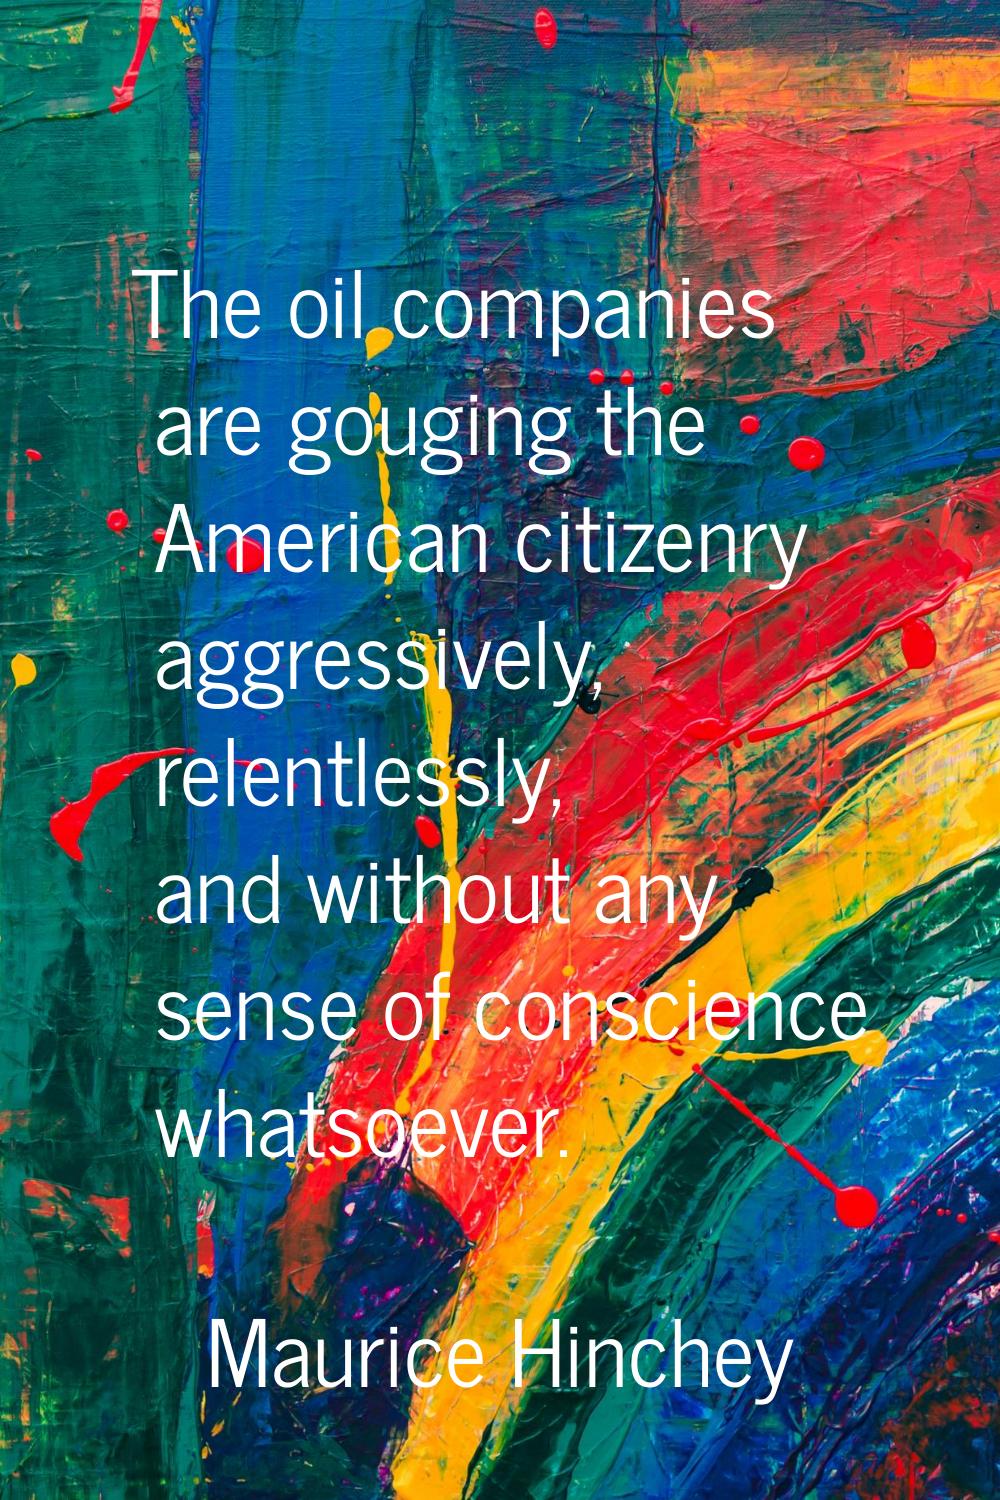 The oil companies are gouging the American citizenry aggressively, relentlessly, and without any se